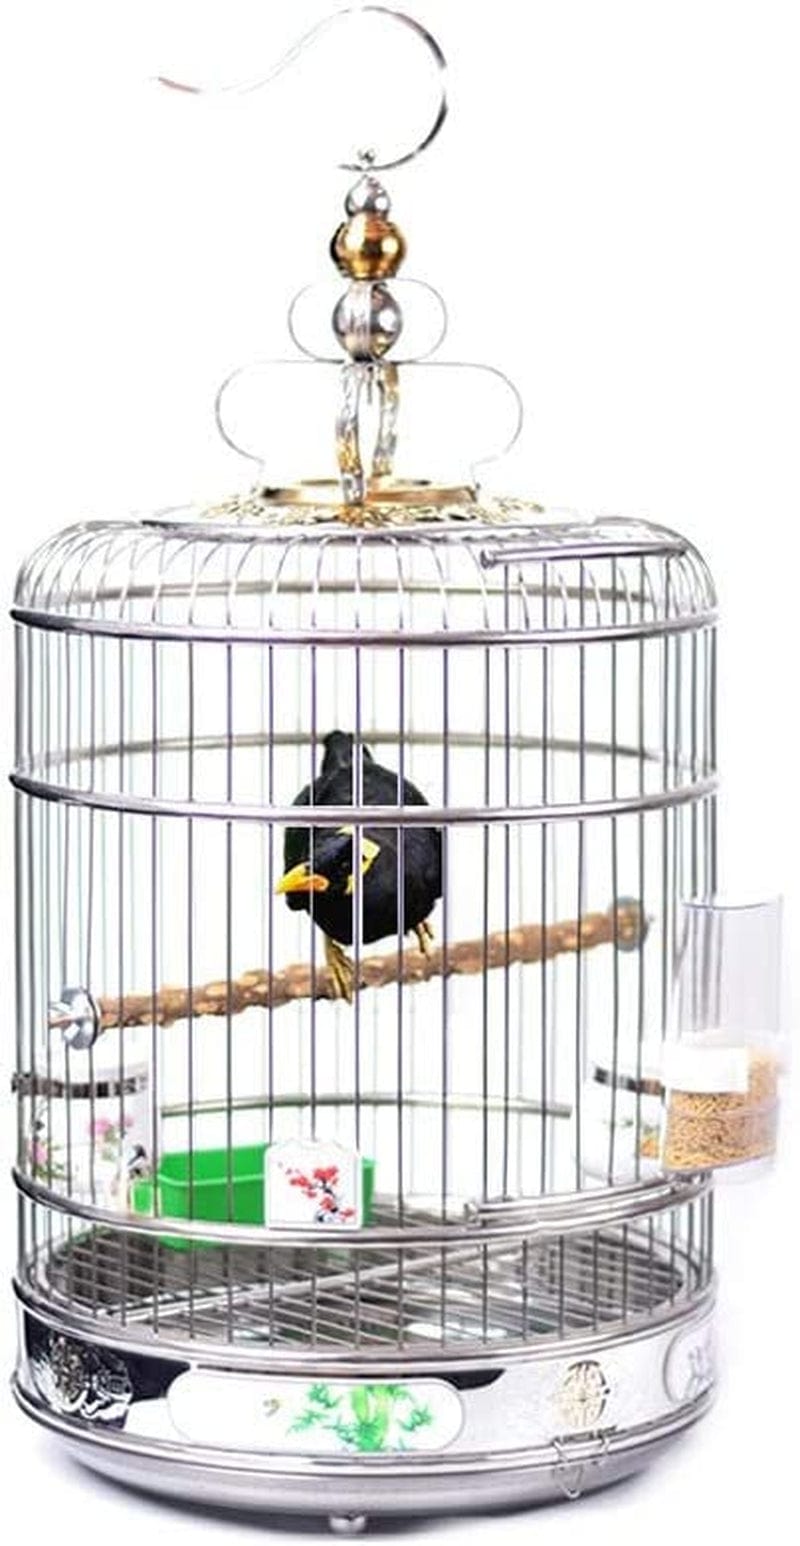 XXSLY Creative Birdcage round Hollow Bird Nest Stainless Steel Hanging Bird Cage Parrot Canary Small Animal Bird Cage Perched Bird Cage Accessories (Size : M) Animals & Pet Supplies > Pet Supplies > Bird Supplies > Bird Cages & Stands XXSLY Large  